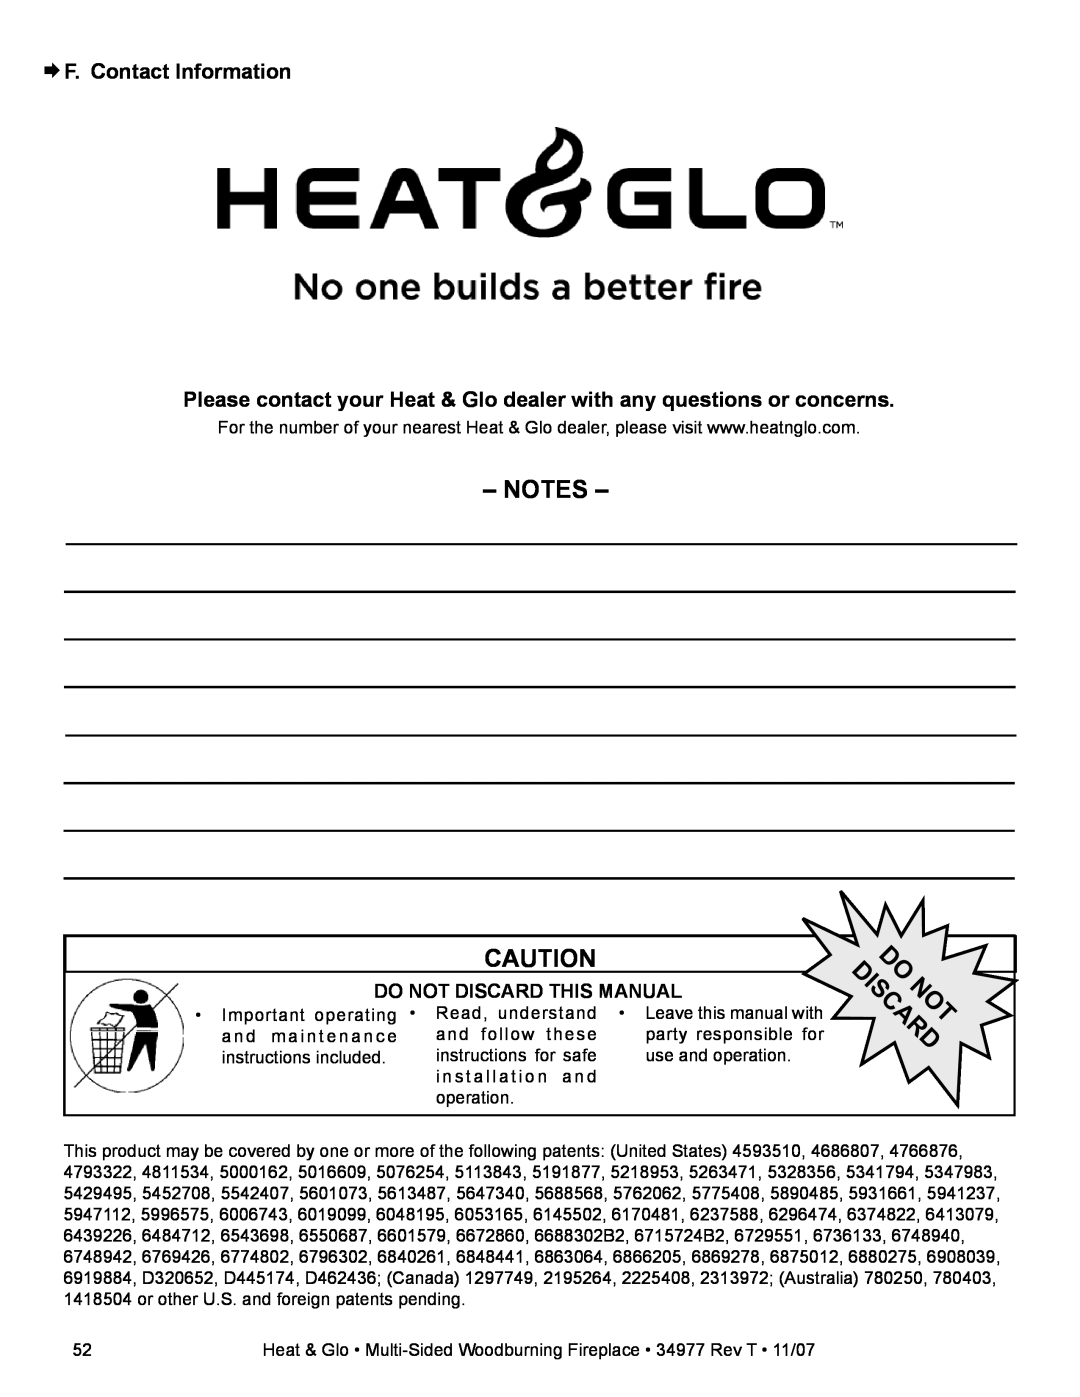 Heat & Glo LifeStyle BAY-40 ¨ F. Contact Information, Please contact your Heat & Glo dealer with any questions or concerns 